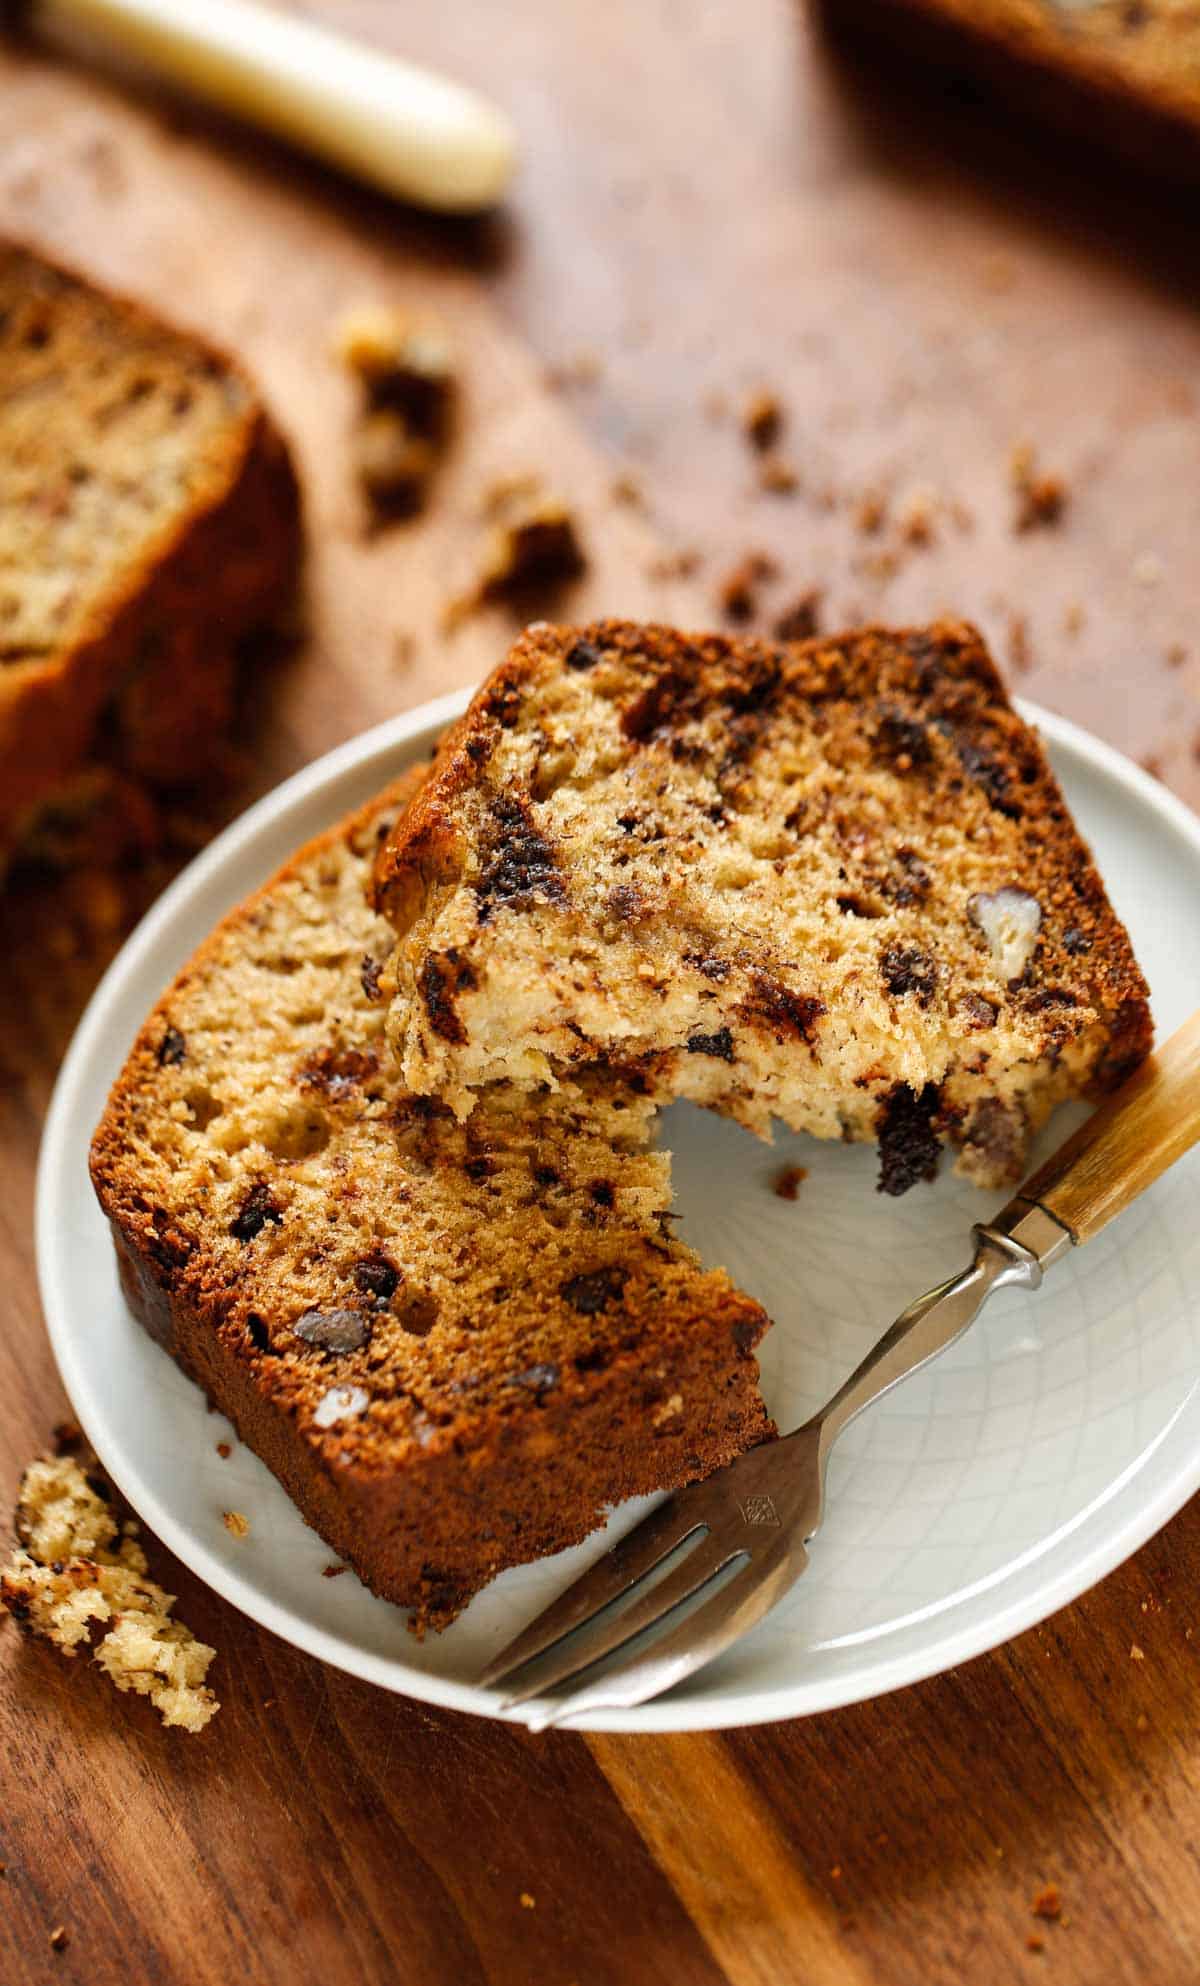 a slice of banana bread on a plate with a fork showing its moist texture